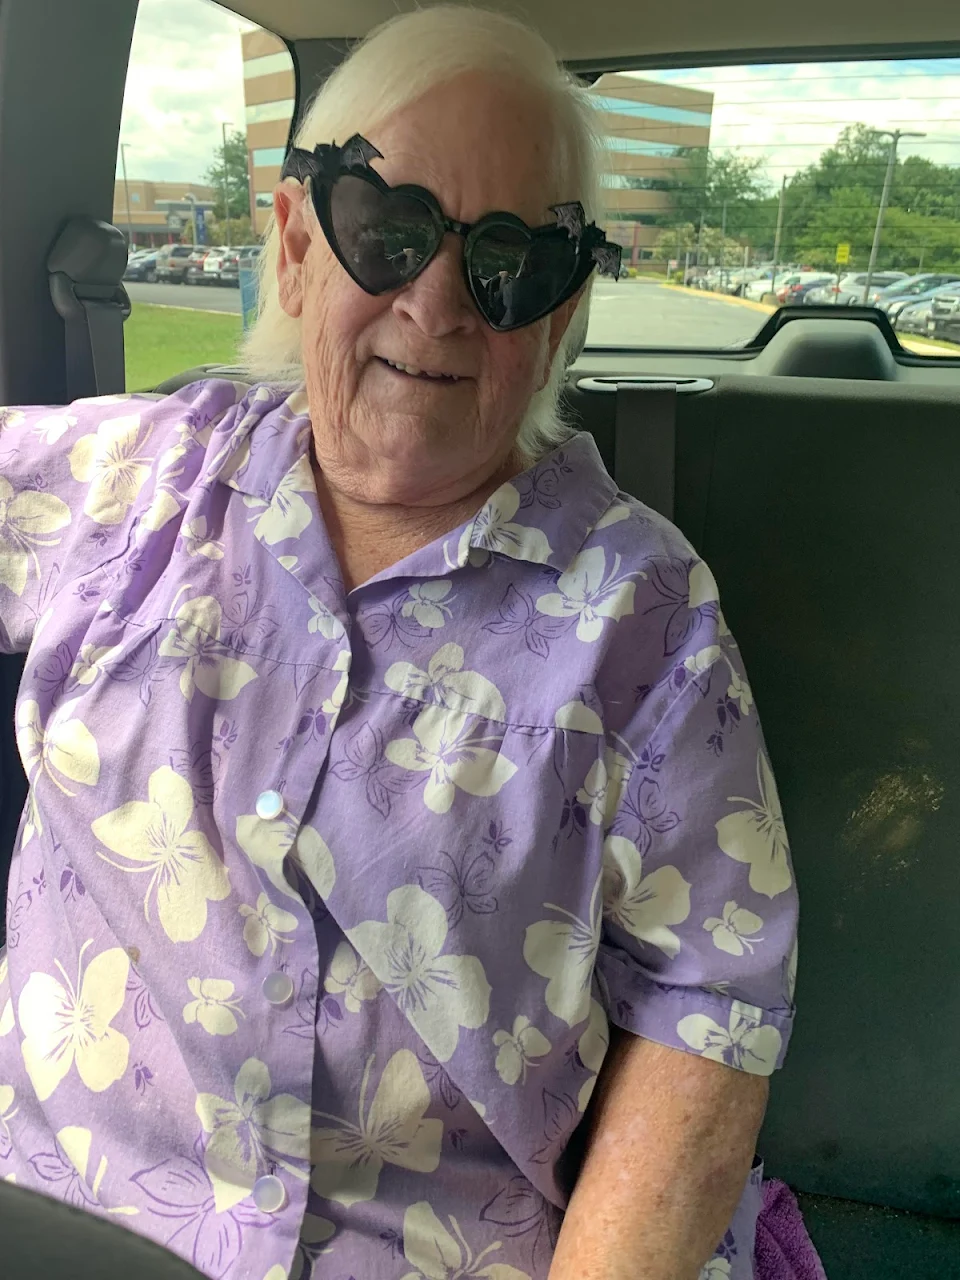 Took my Grandmother to the doctors today and she pulls out these Bat Sunglasses she got of Etsy!(OC)